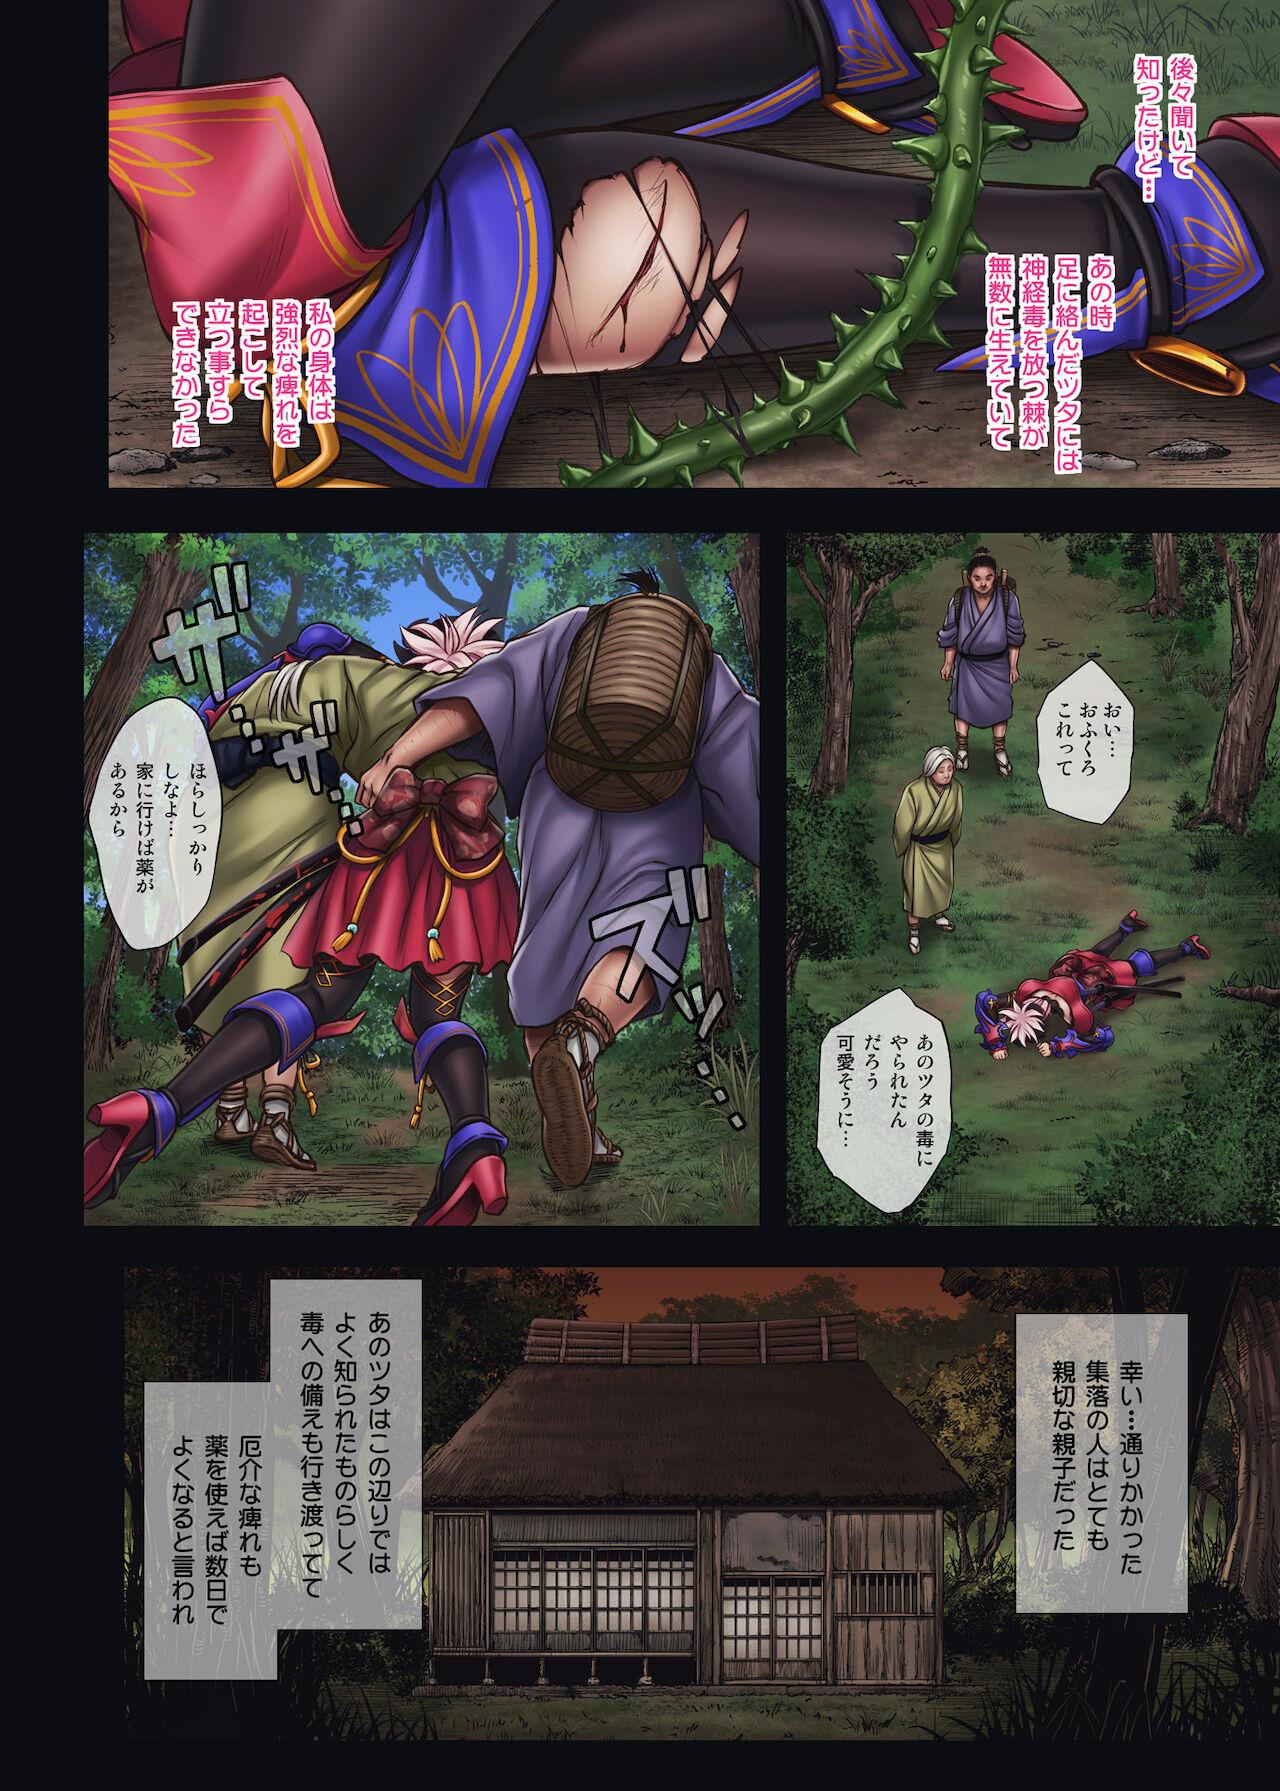 Atm Cyclone no Doujinshi Full Color Pack 4 - Fate grand order Bhabhi - Page 7